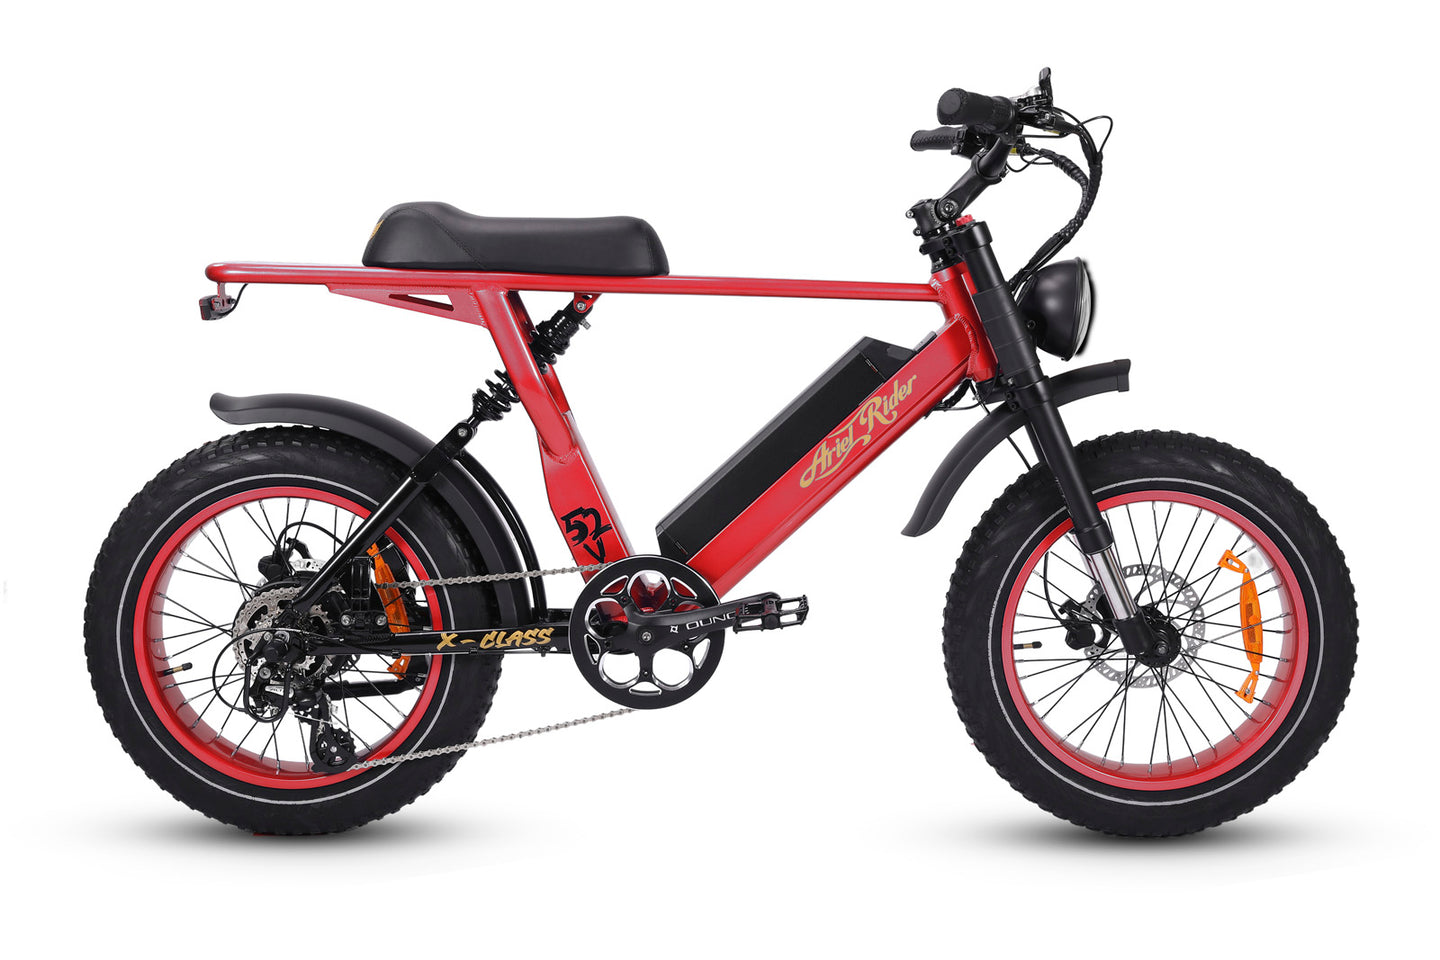 Ariel Rider Ebikes - Red color X-Class 52V fat tire electric bike from the side on a white background